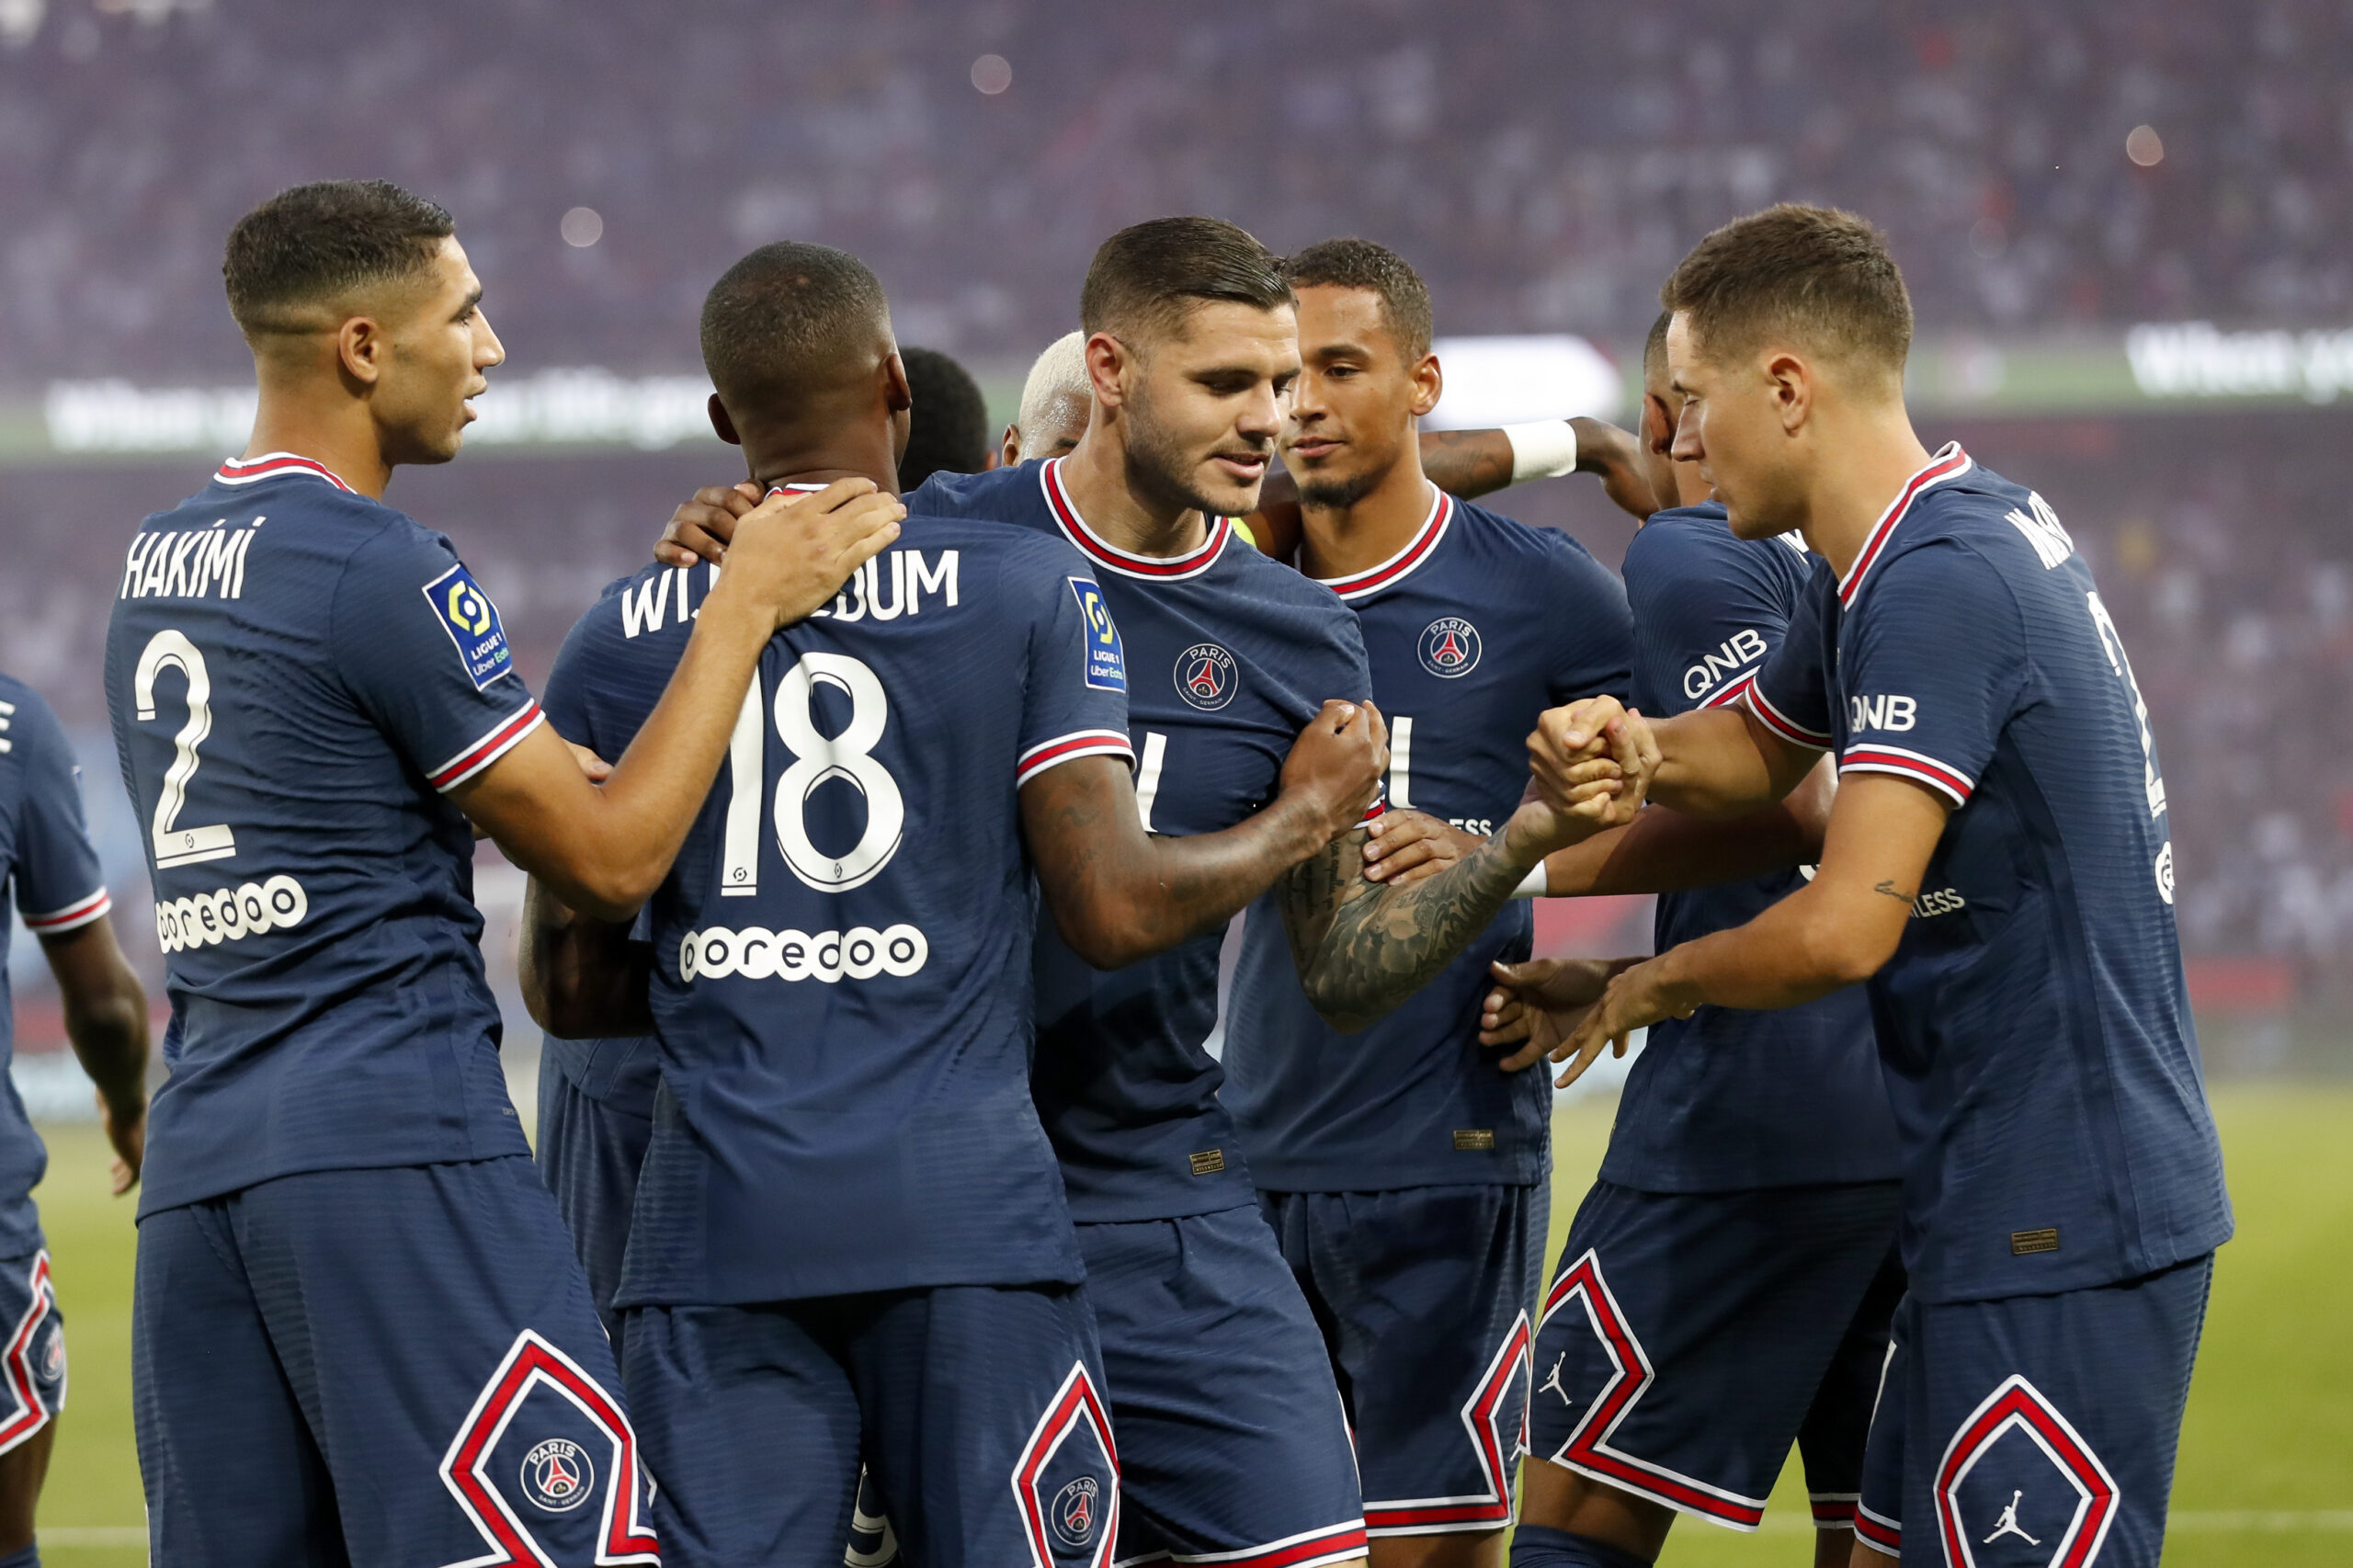 Brest-PSG: quote e scommesse Ligue 1 20/08/21 | bwin news